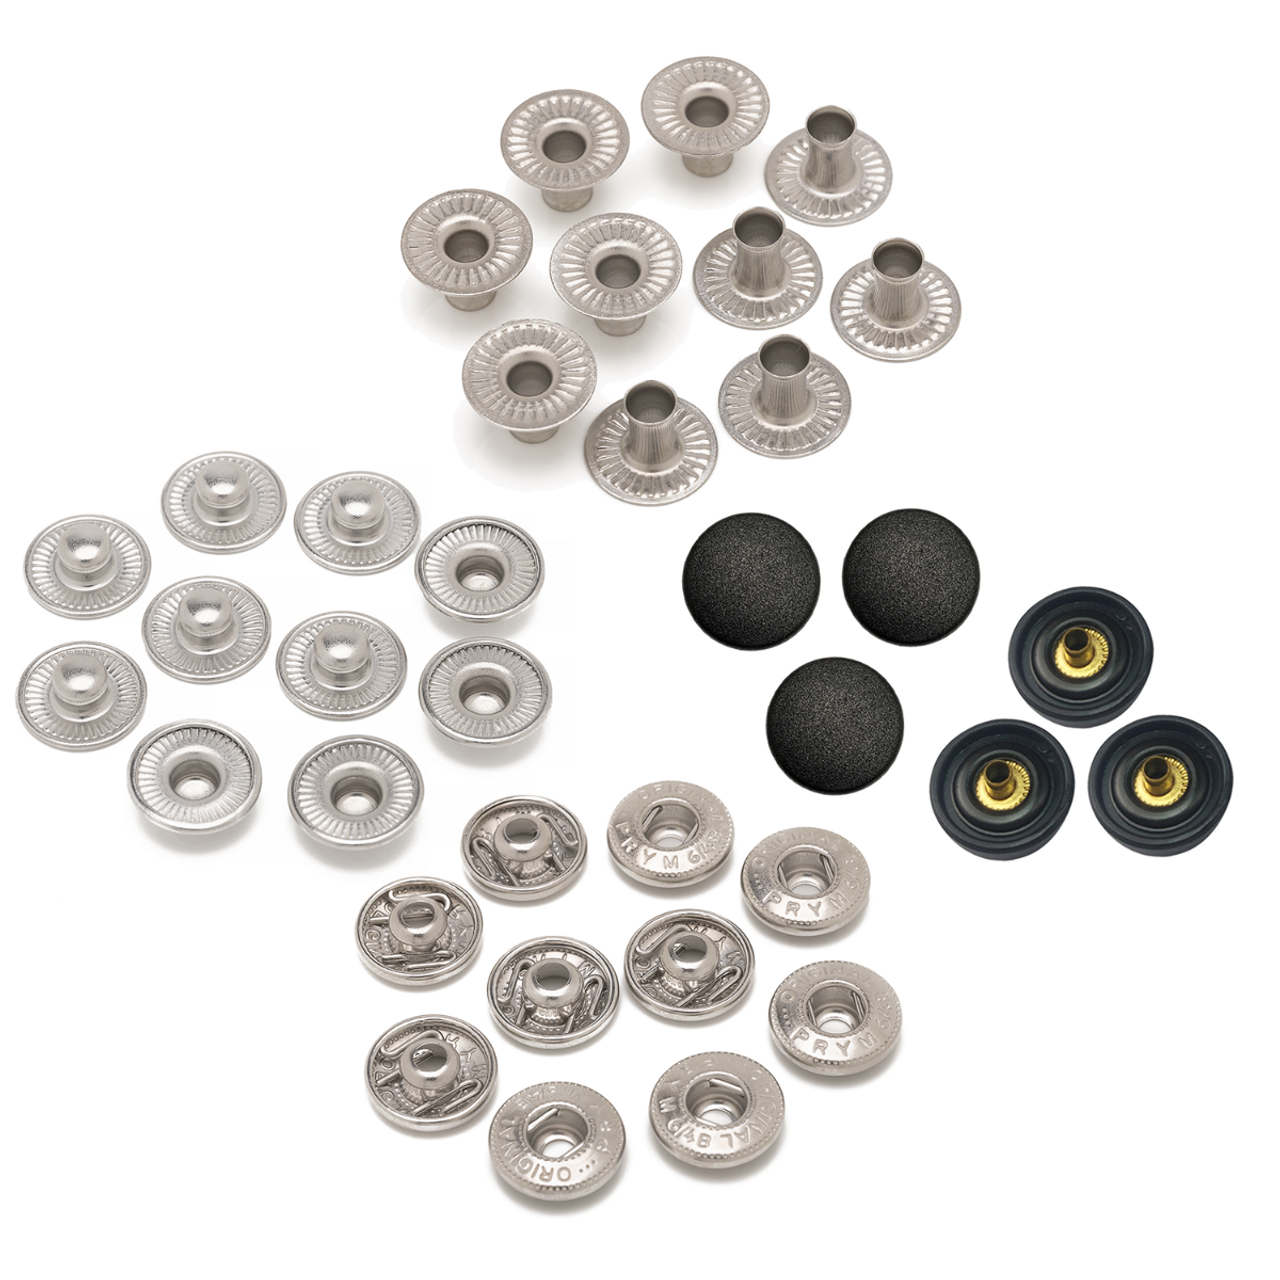 Trimming Shop 15mm S Spring Press Studs Snap Fasteners Plastic Cap with  Gunmetal Black Metal Back Snap Buttons - Black, 50pcs